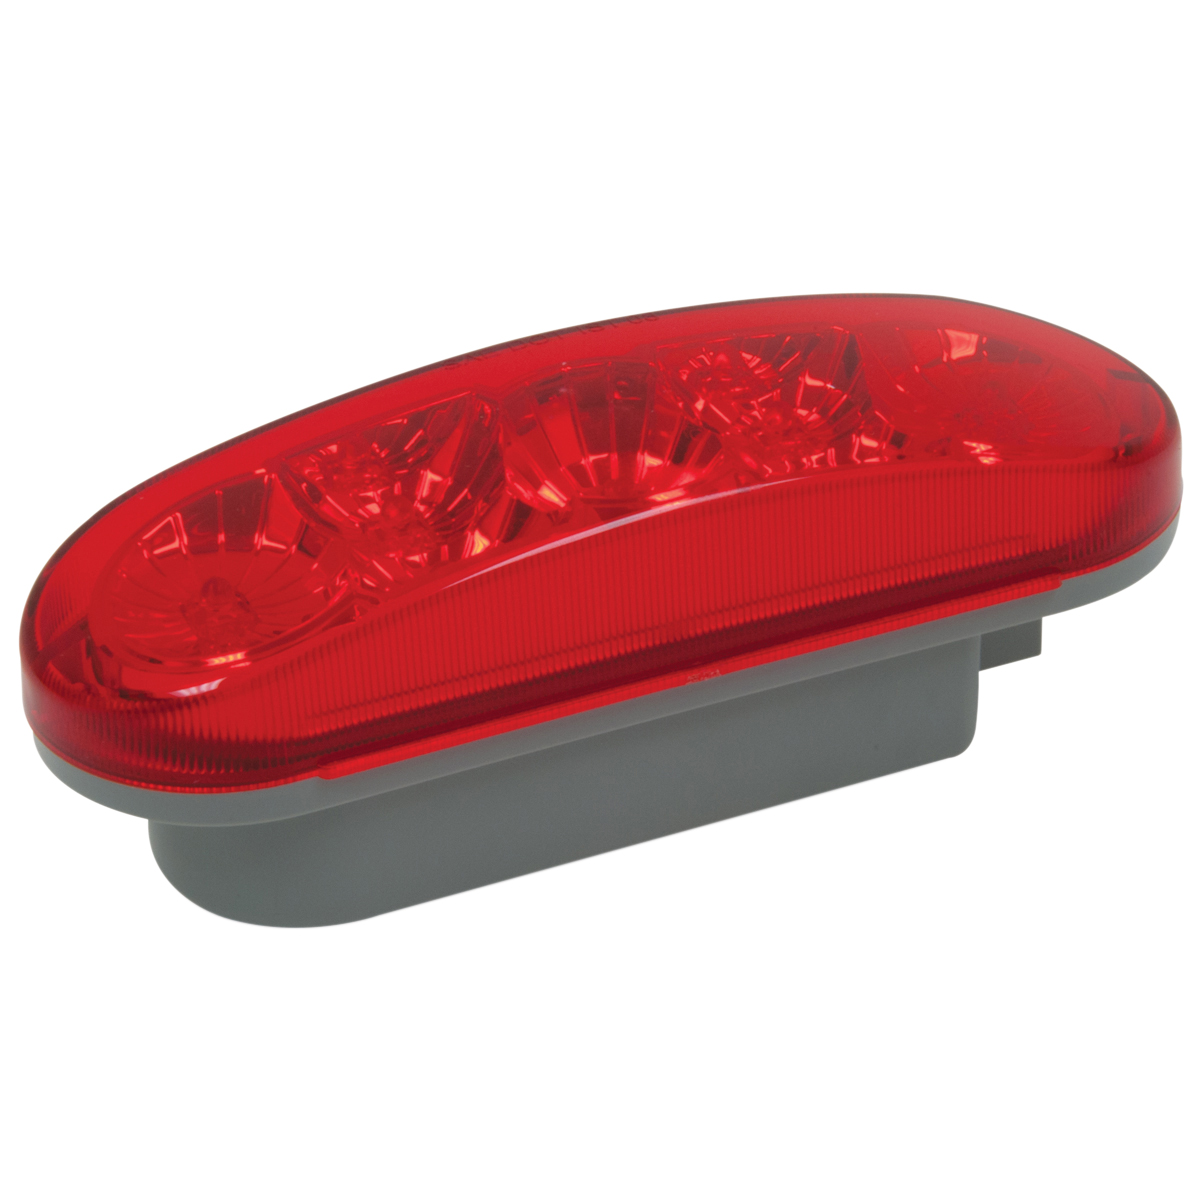 LED DIA LENS TURN/STOP/TAIL RED